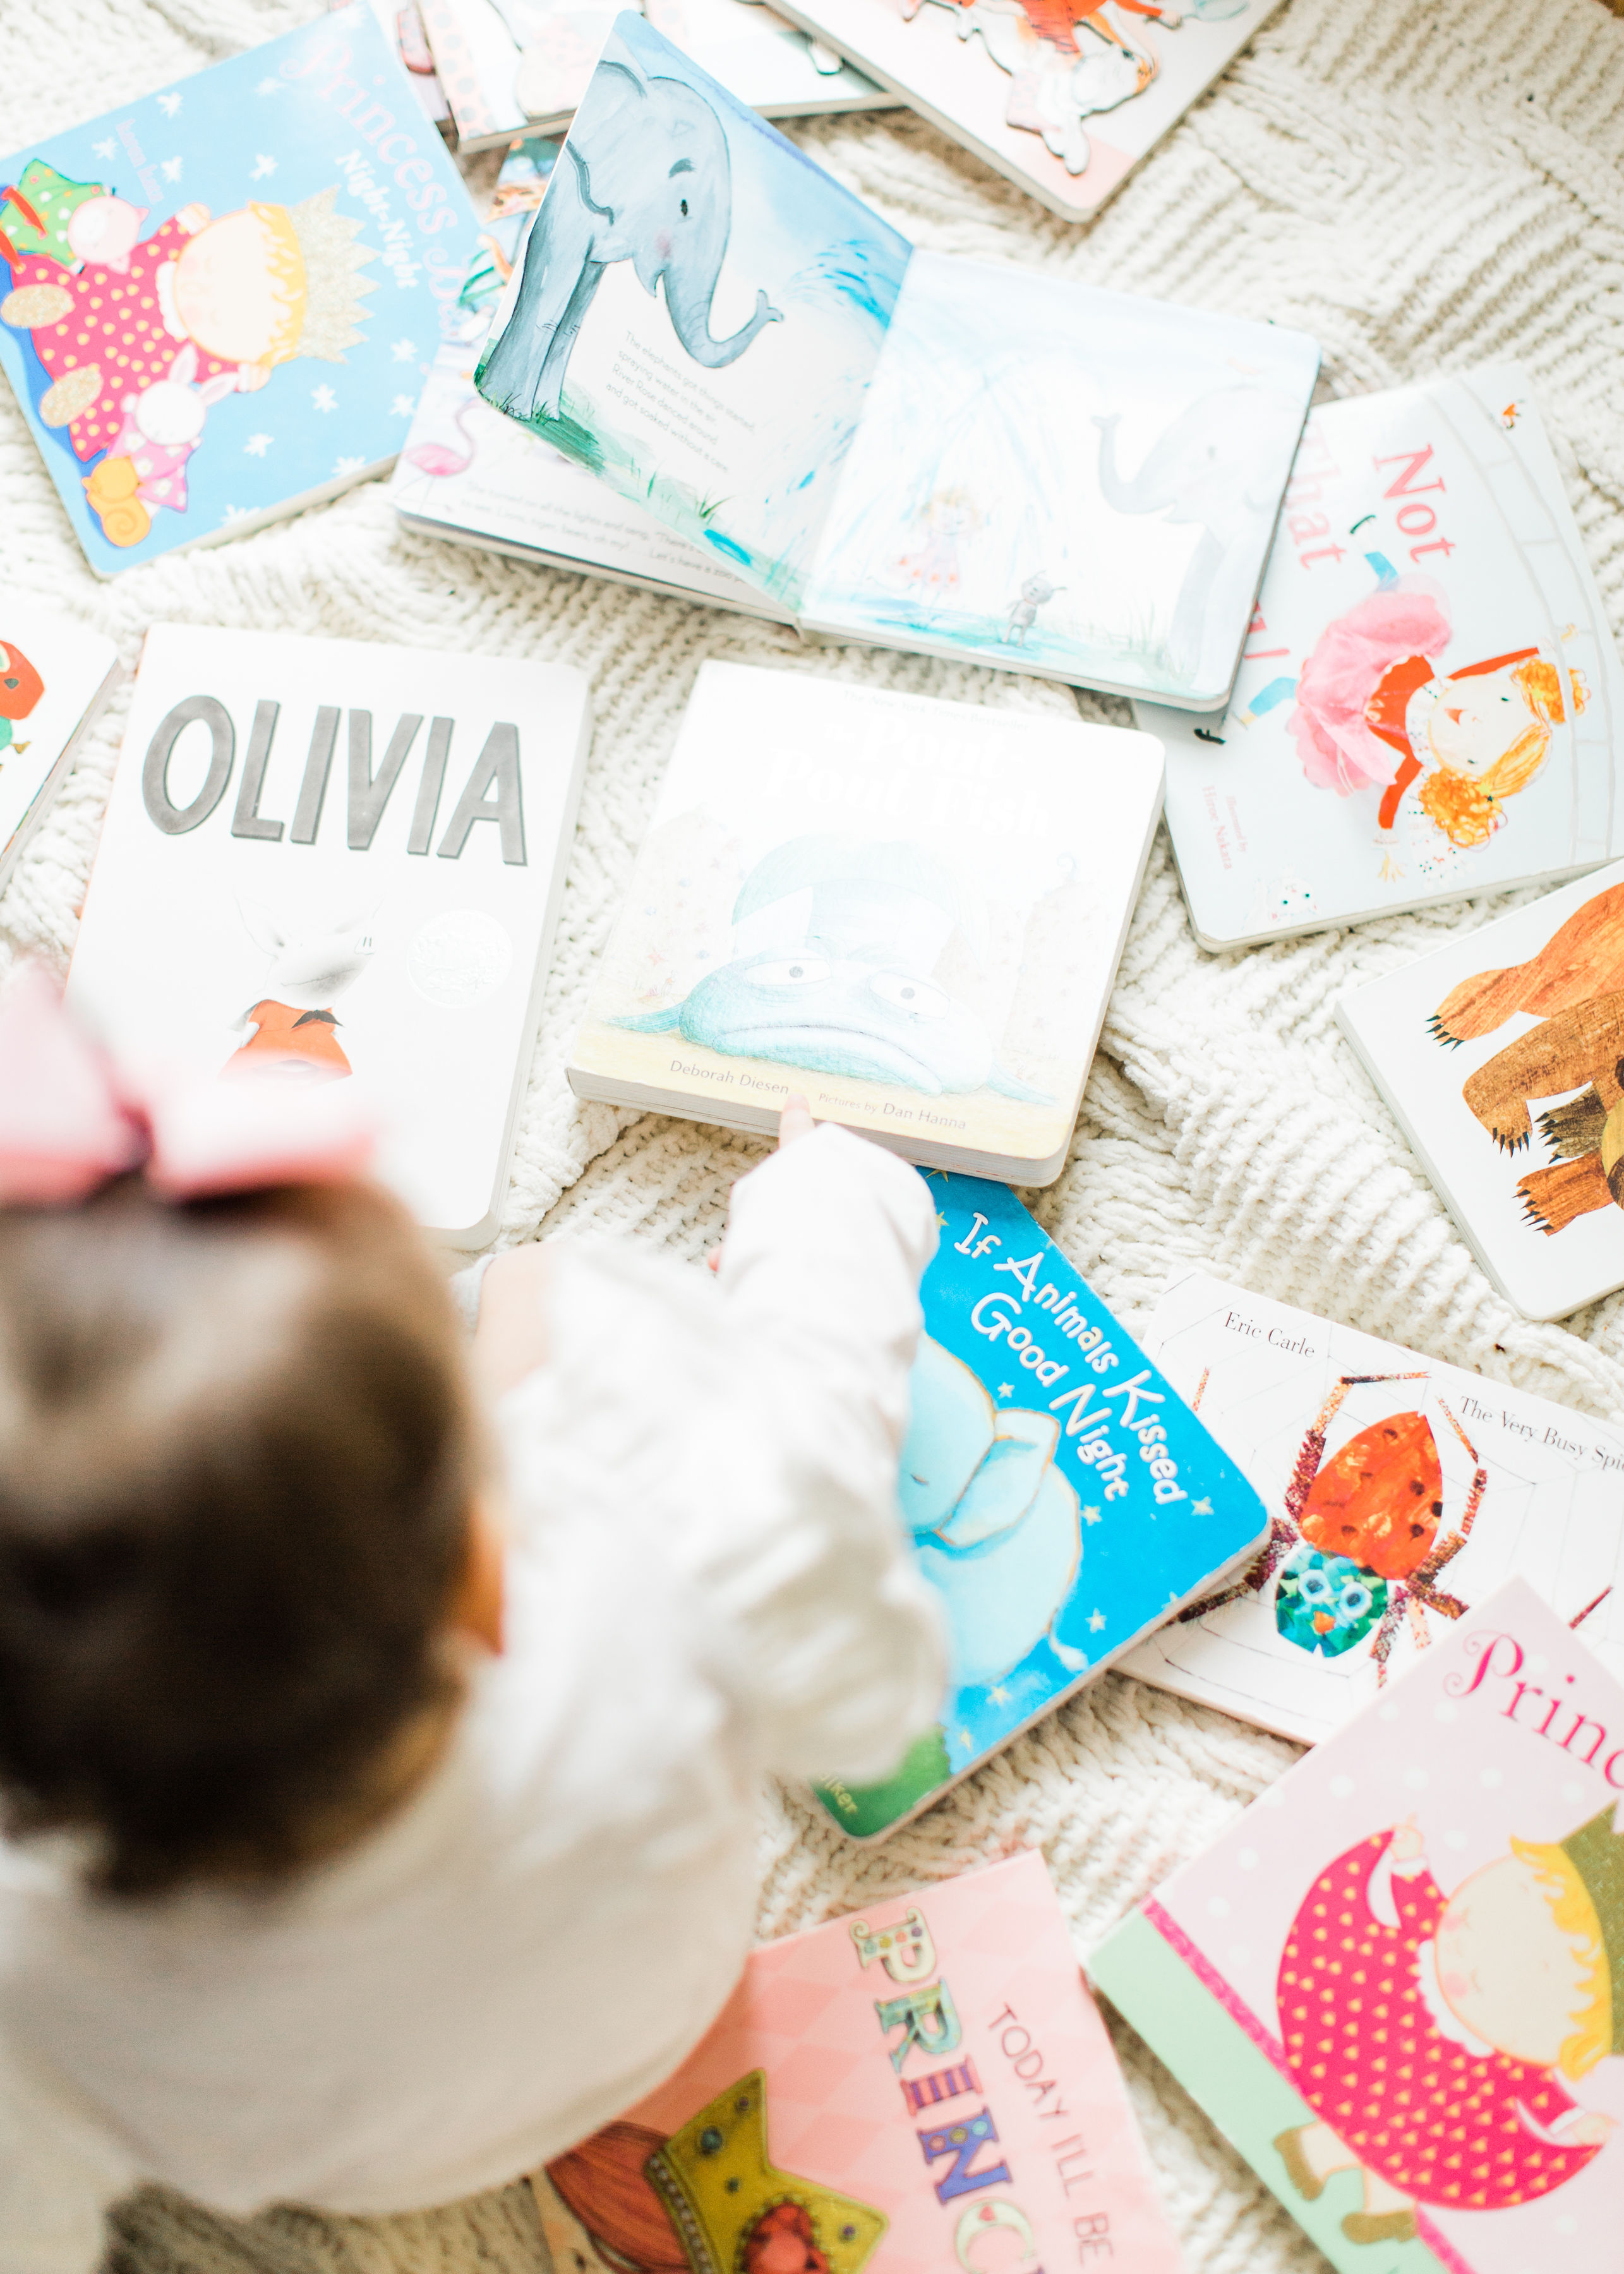 Because we absolutely adore our ever-growing book collection, we are sharing a whole bunch of our favorites; a.k.a., the board books we think work best for the baby and toddler years, to create lasting memories. | glitterinc.com | @glitterinc